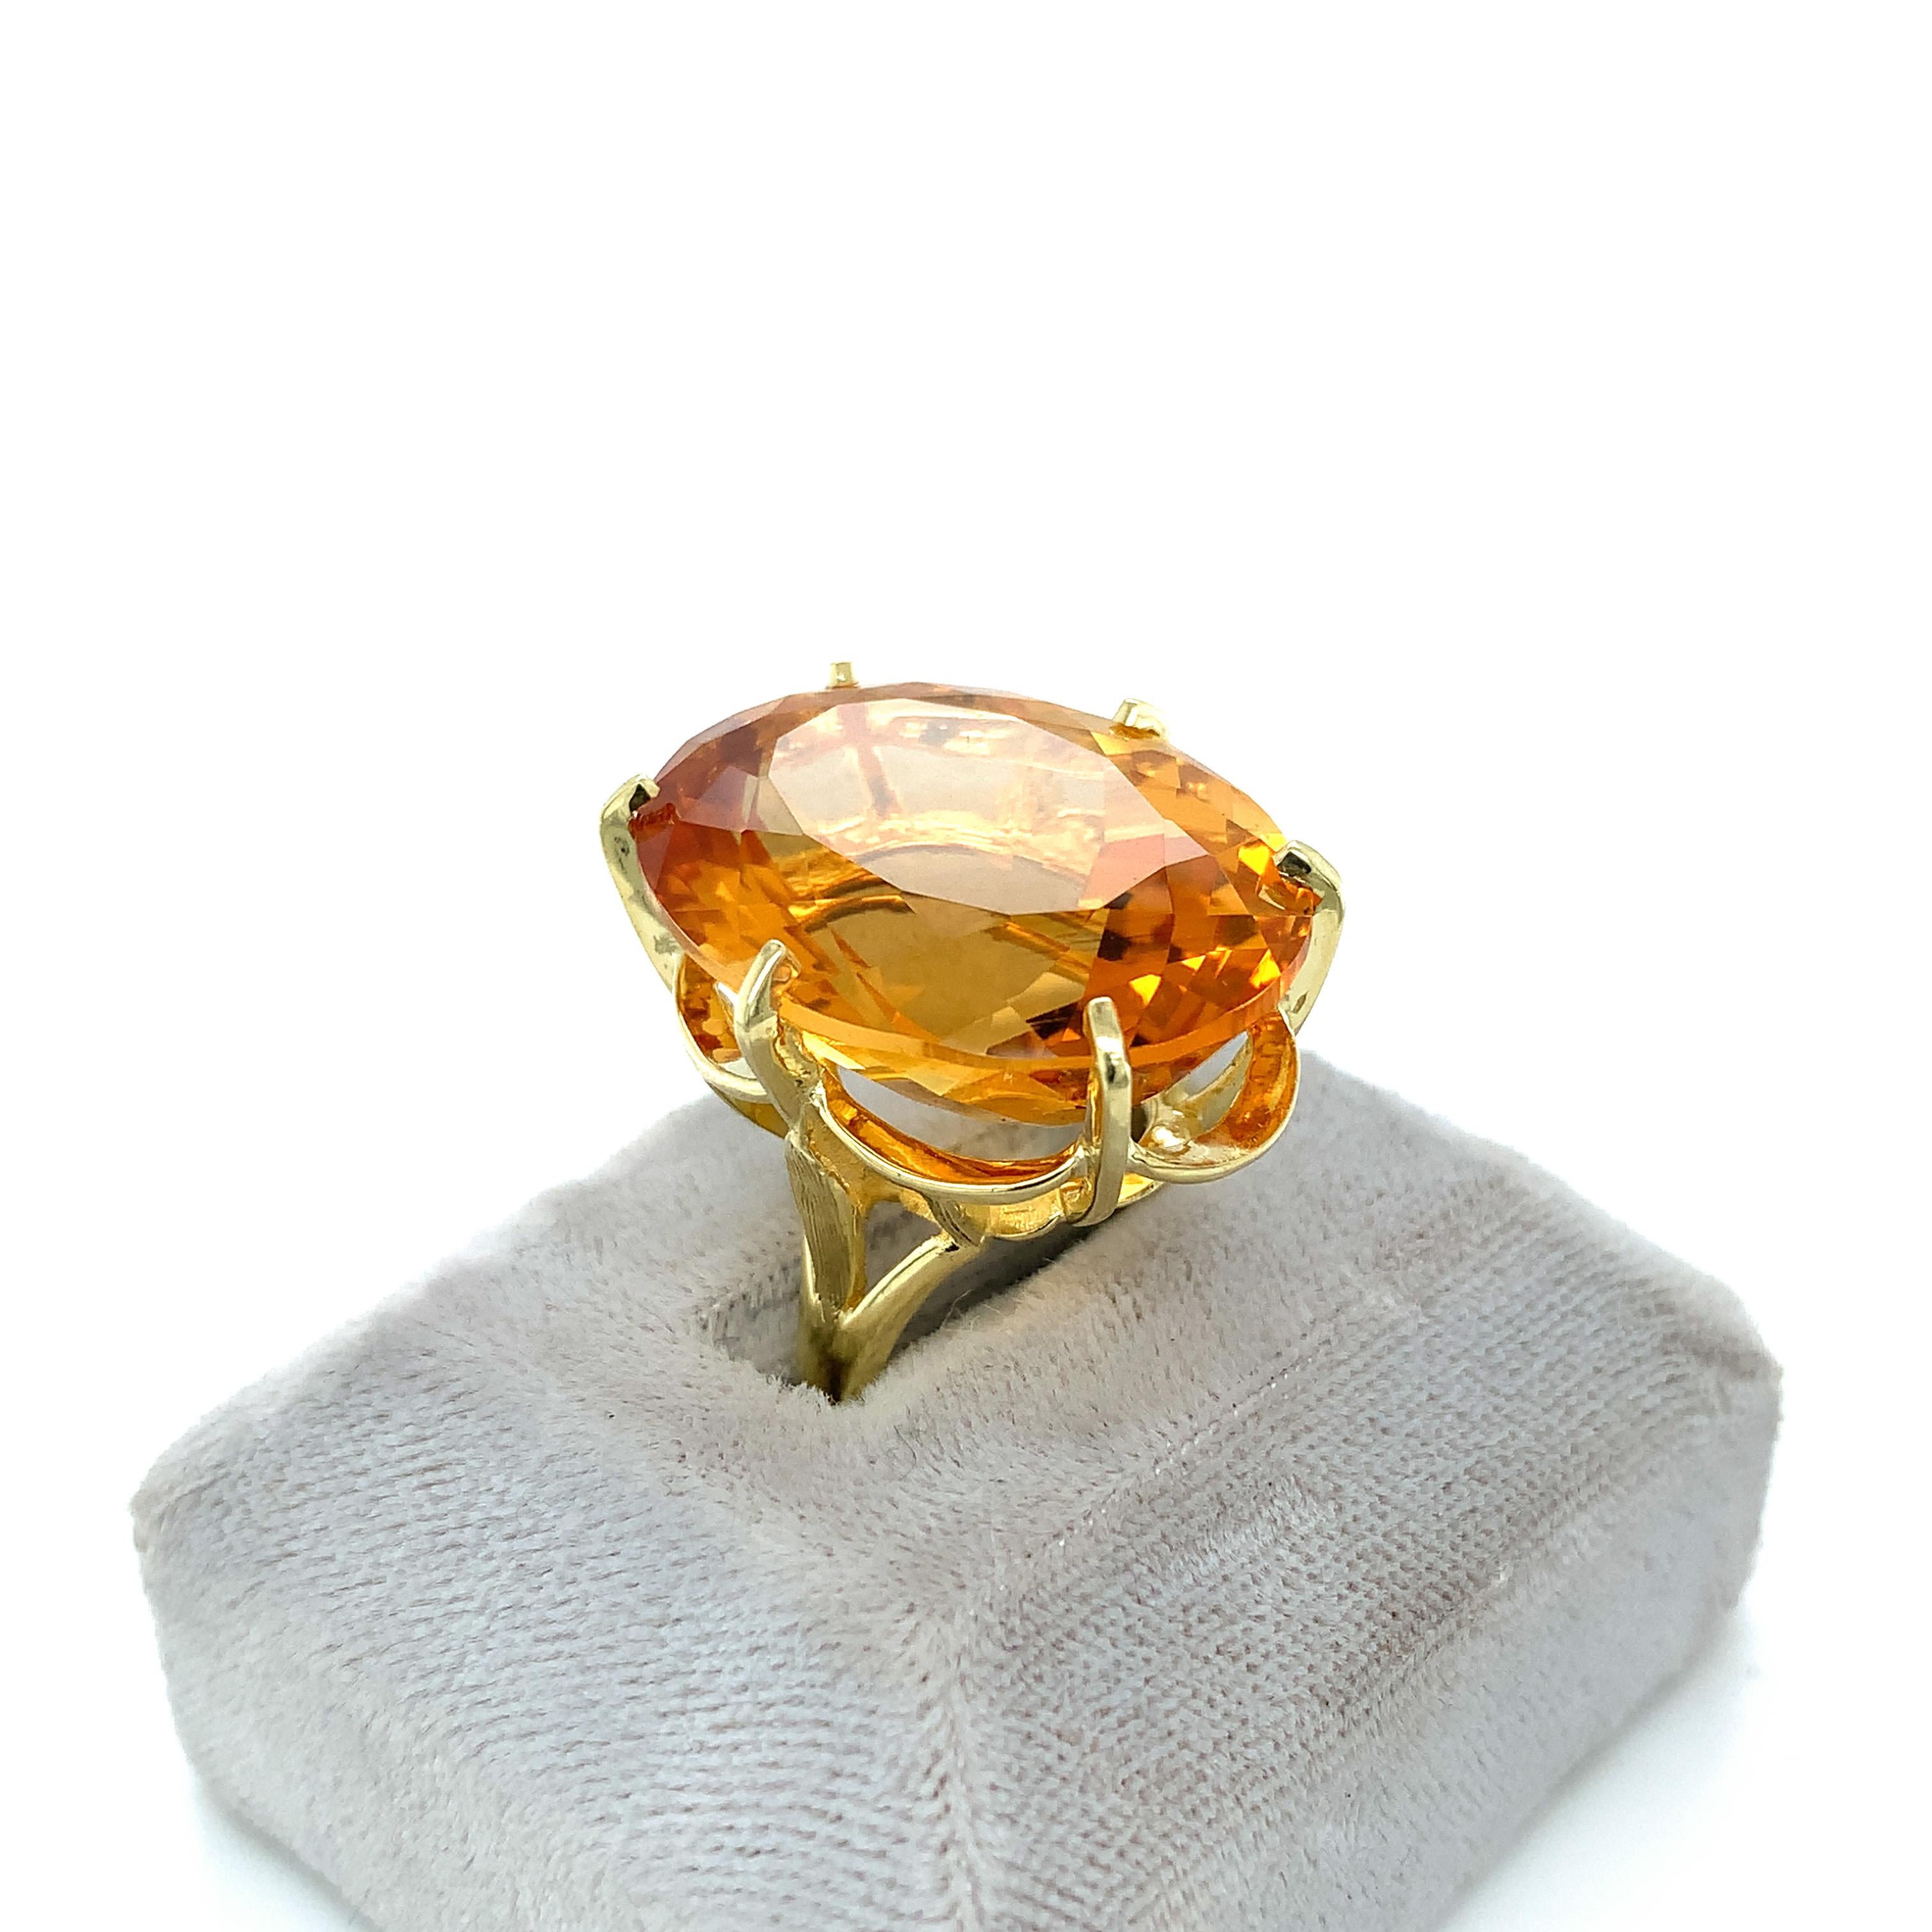 Women's 18K yellow gold Ring with a Huge 37 carat Citrine For Sale